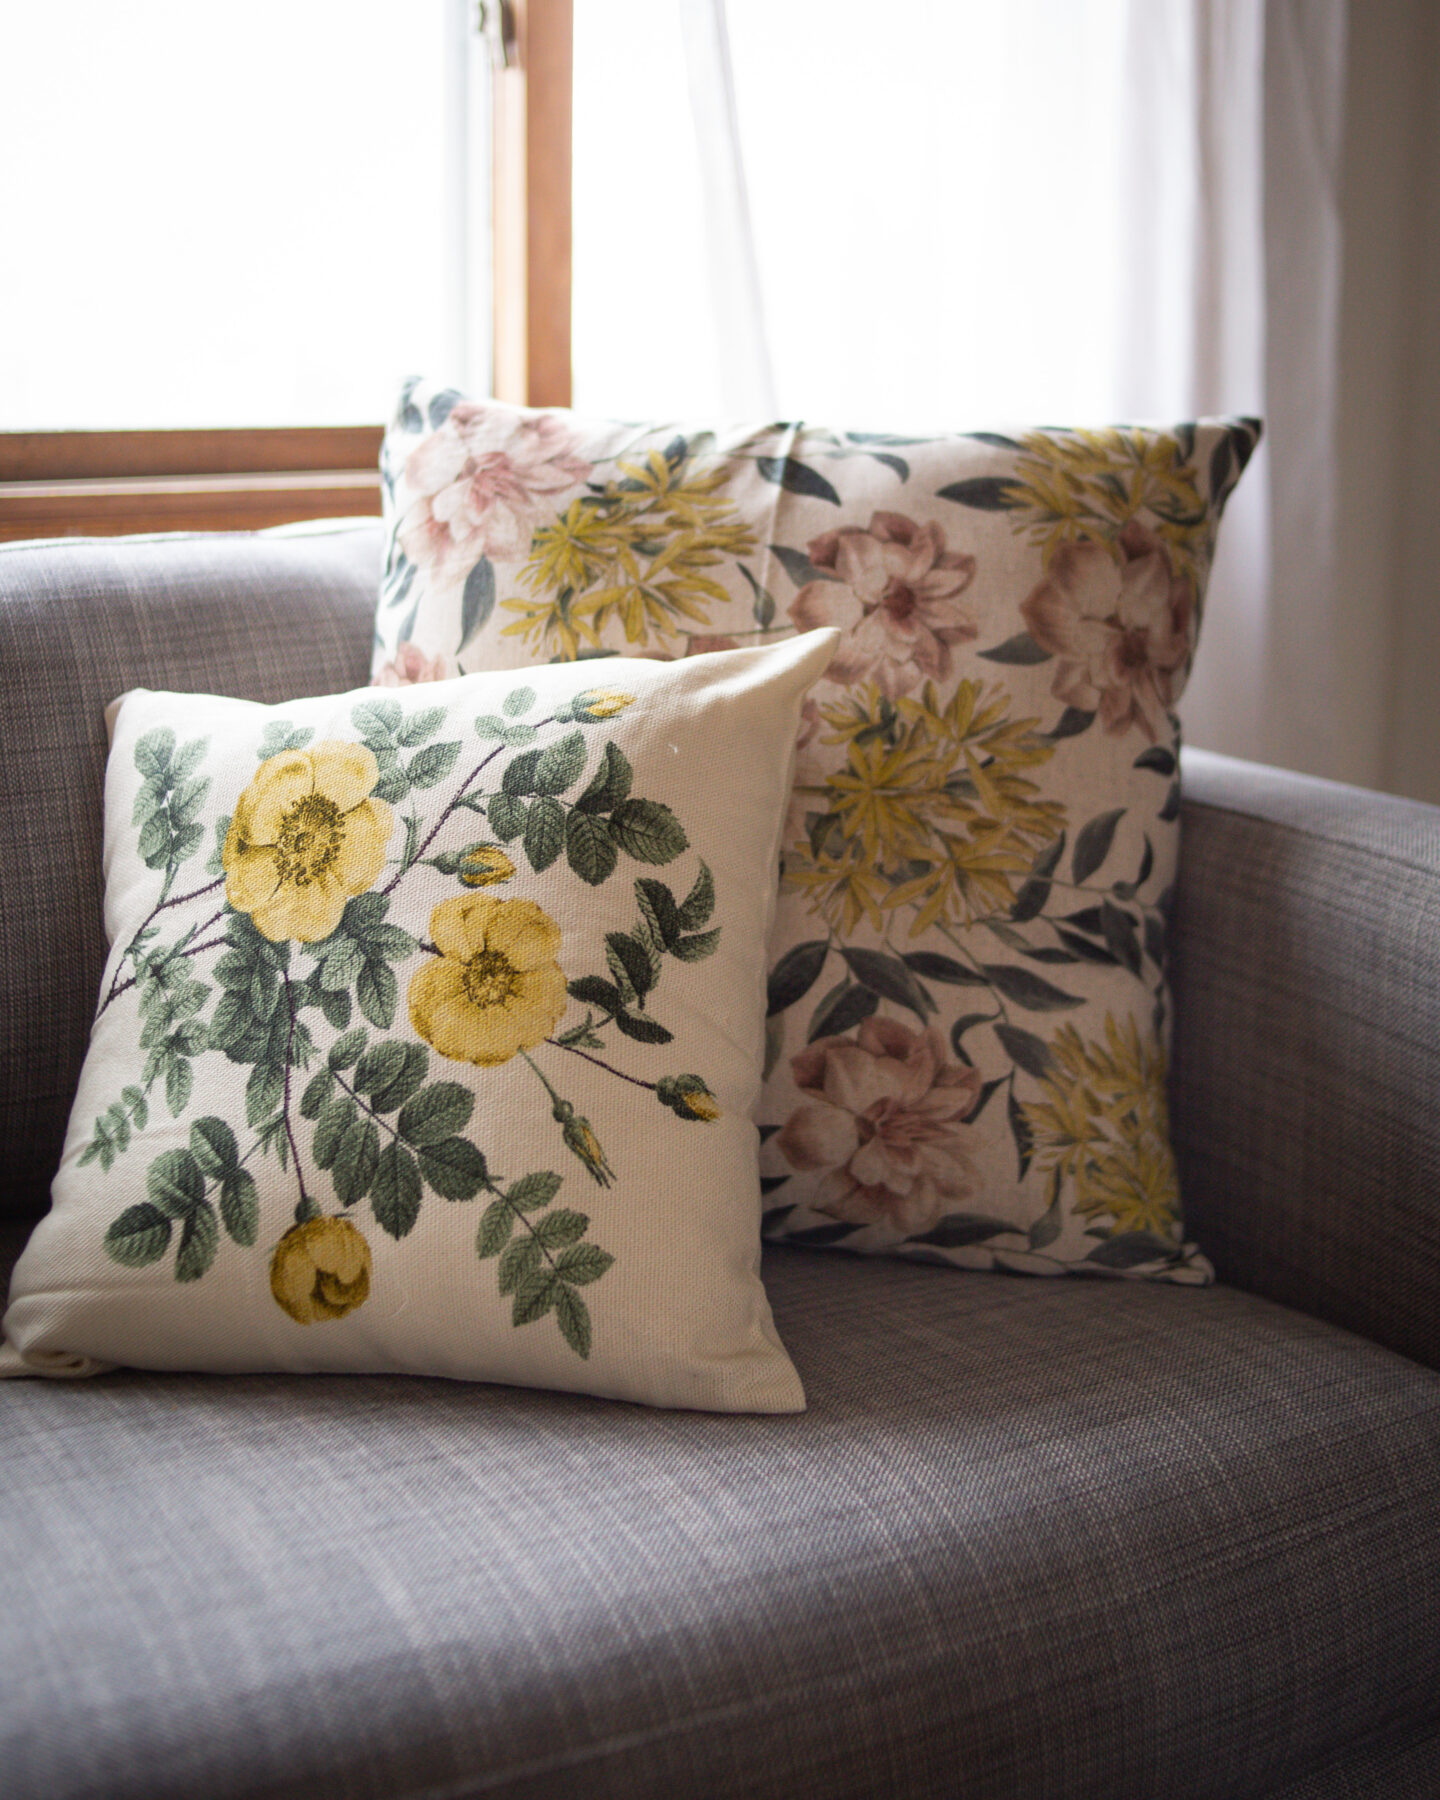 Karin Emily shares a floral print throw pillow for her Mother's Day Gift Guide